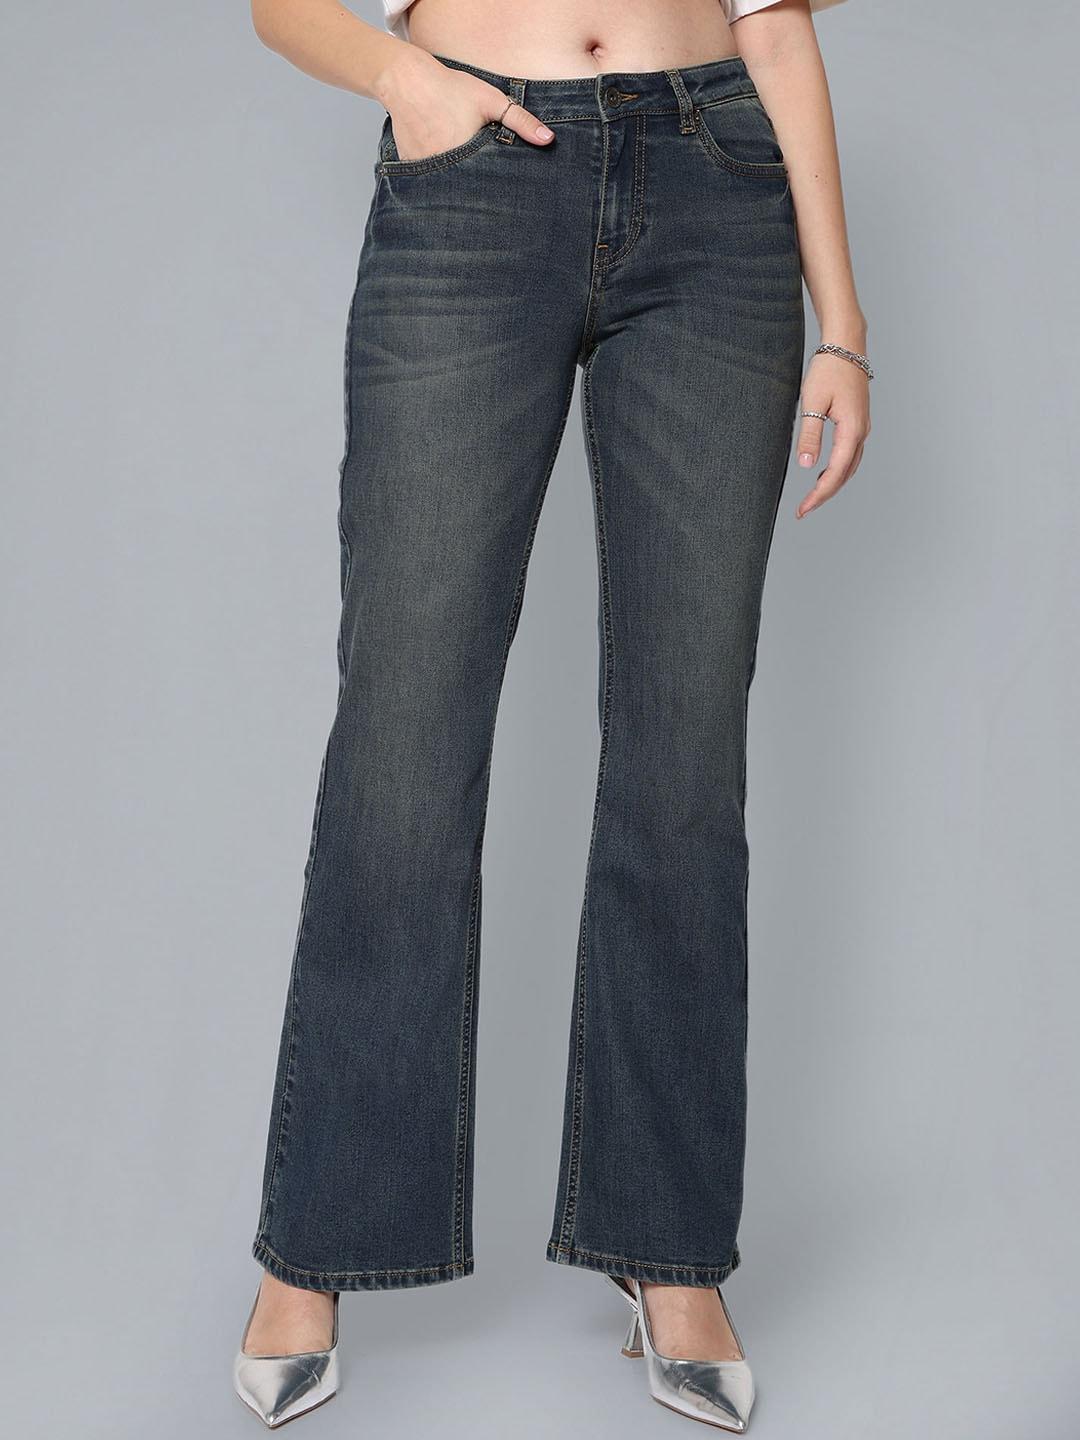 flying-machine-women-clean-look-high-rise-light-fade-stretchable-bootcut-jeans